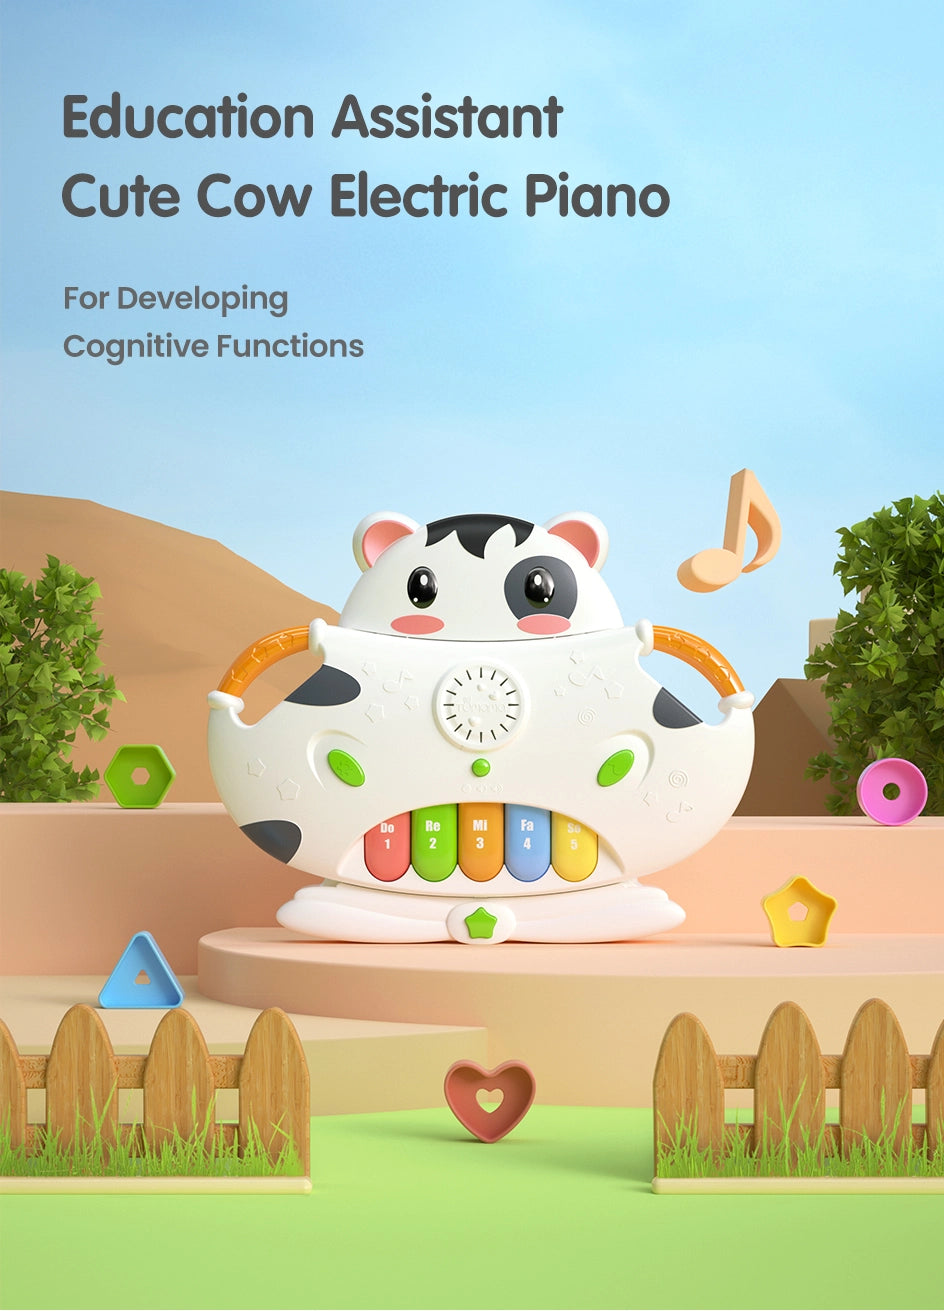 Cow piano for interactive musical exploration